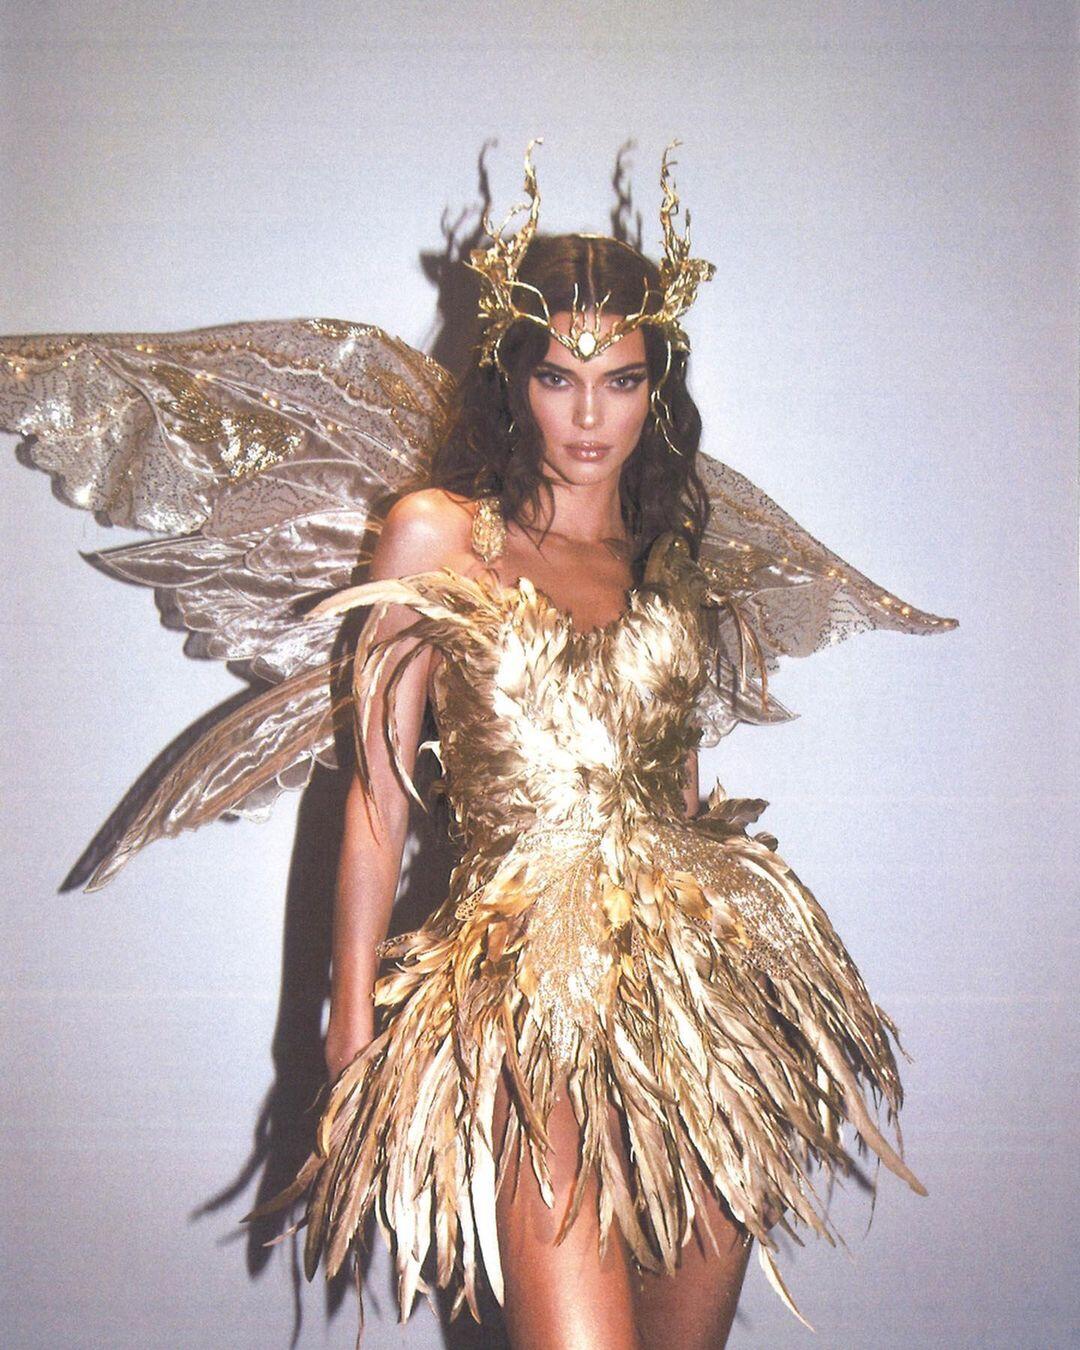 Kendall as a Forest Fairy  